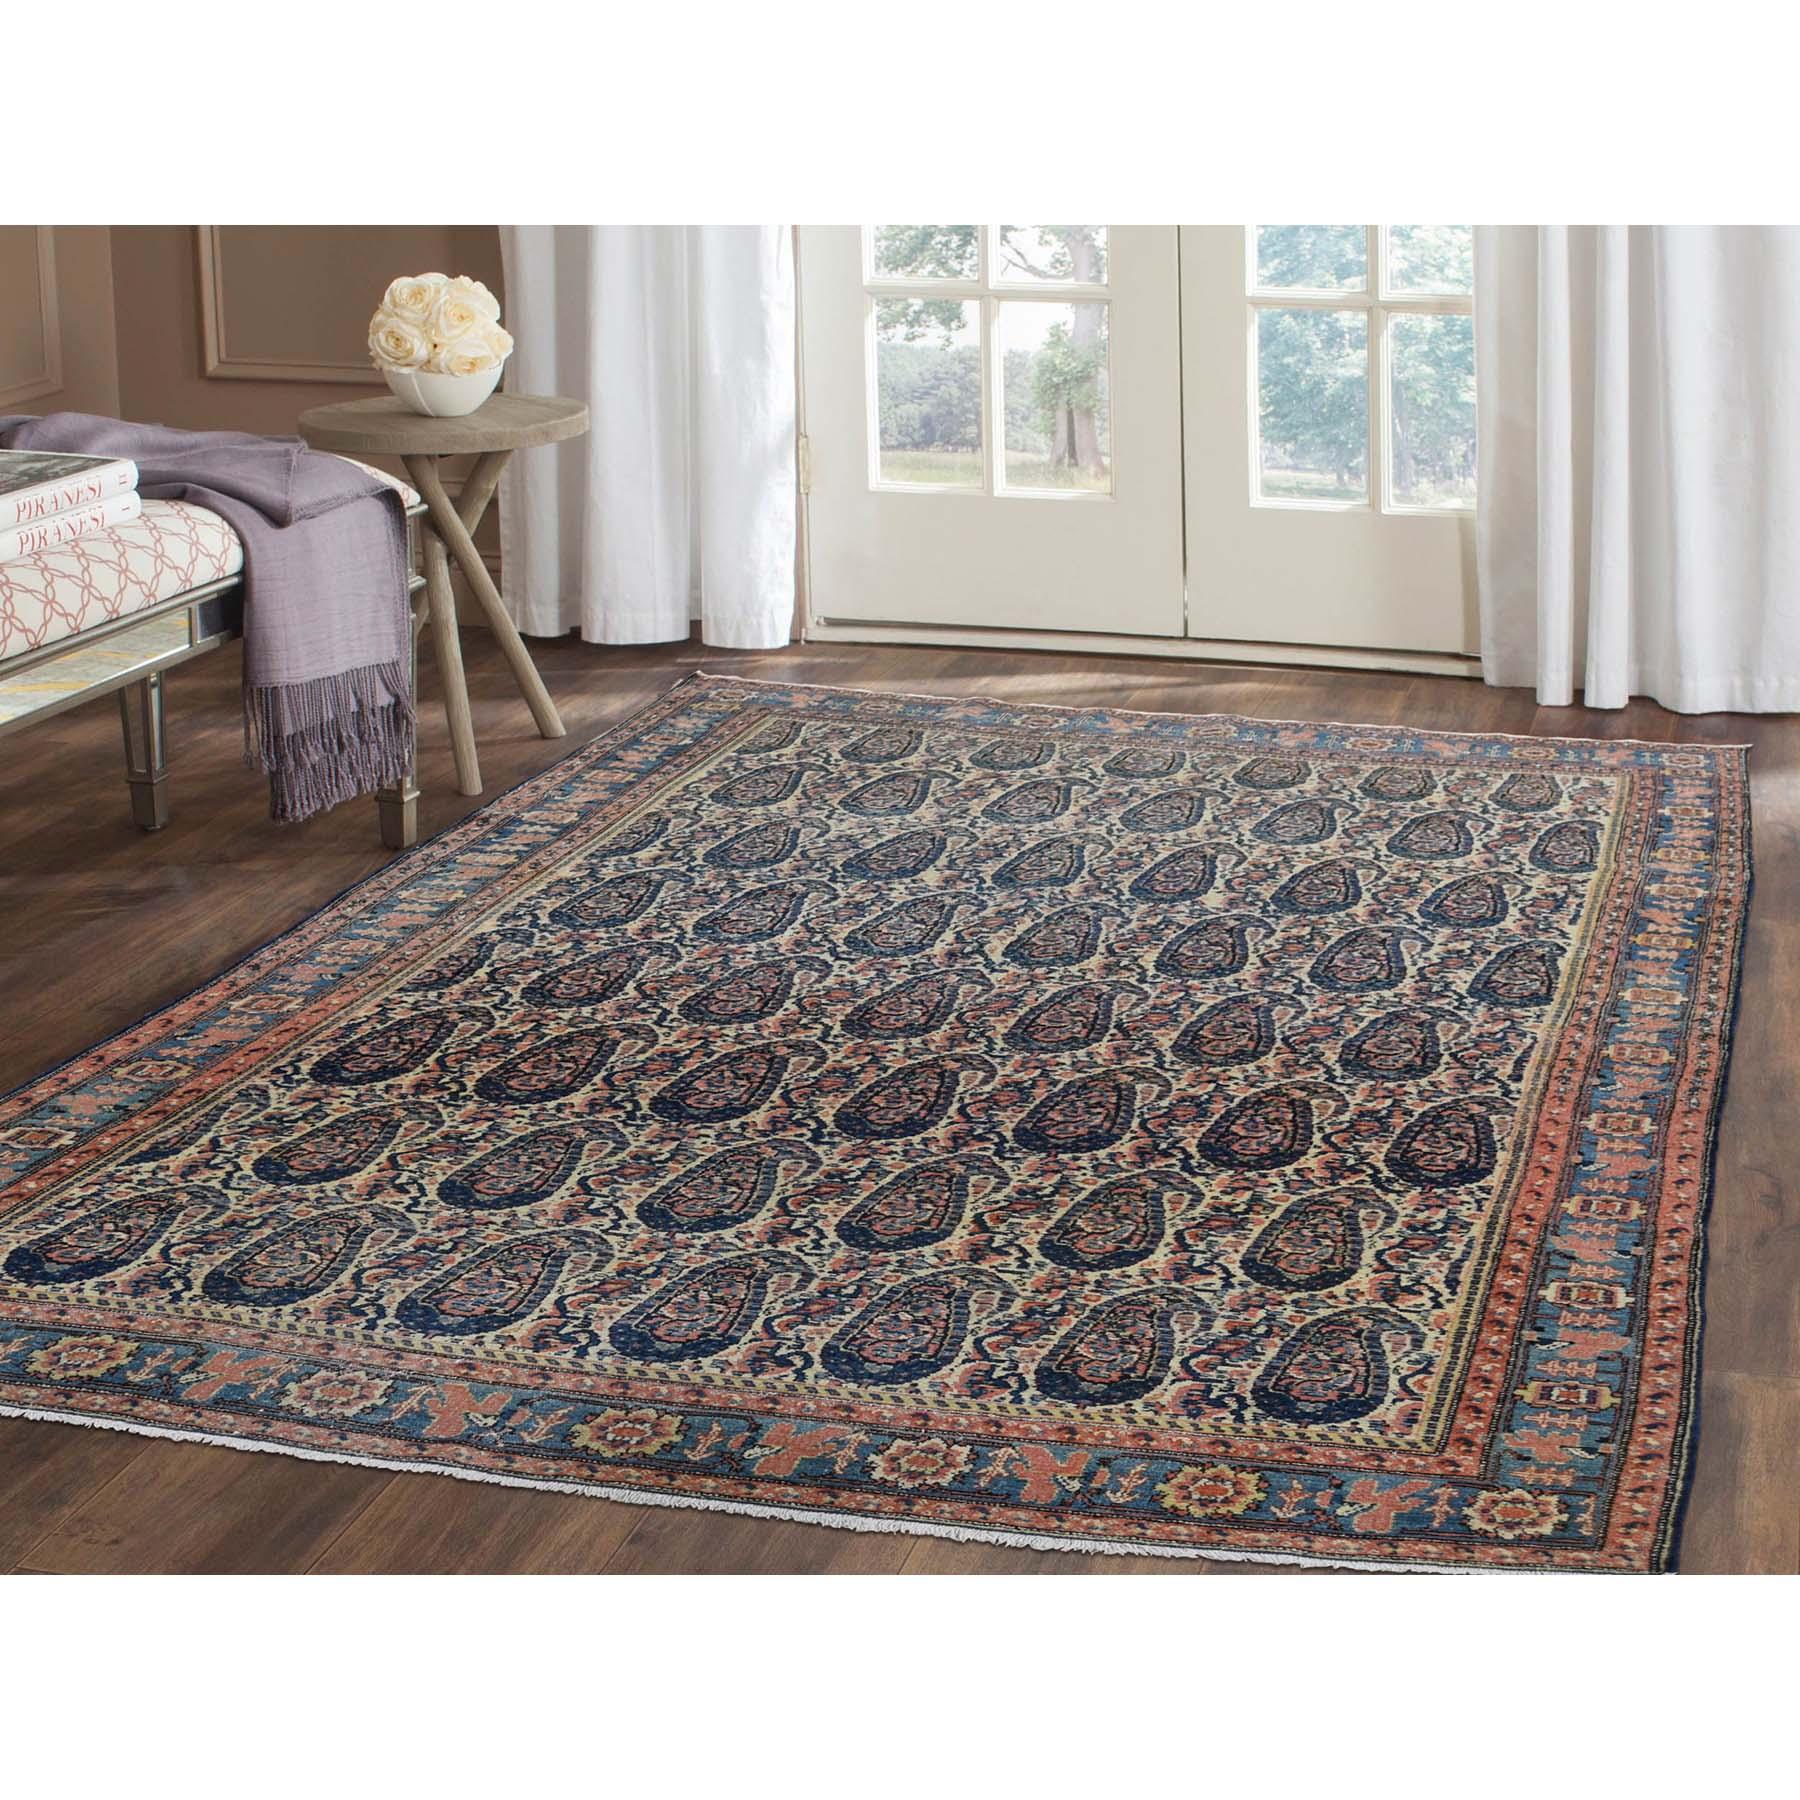 This is a truly genuine one-of-a-kind antique Persian Senneh paisley design excellent condition hand knotted rug. It has been knotted for months and months in the centuries-old Persian weaving craftsmanship techniques by expert artisans.


Primary